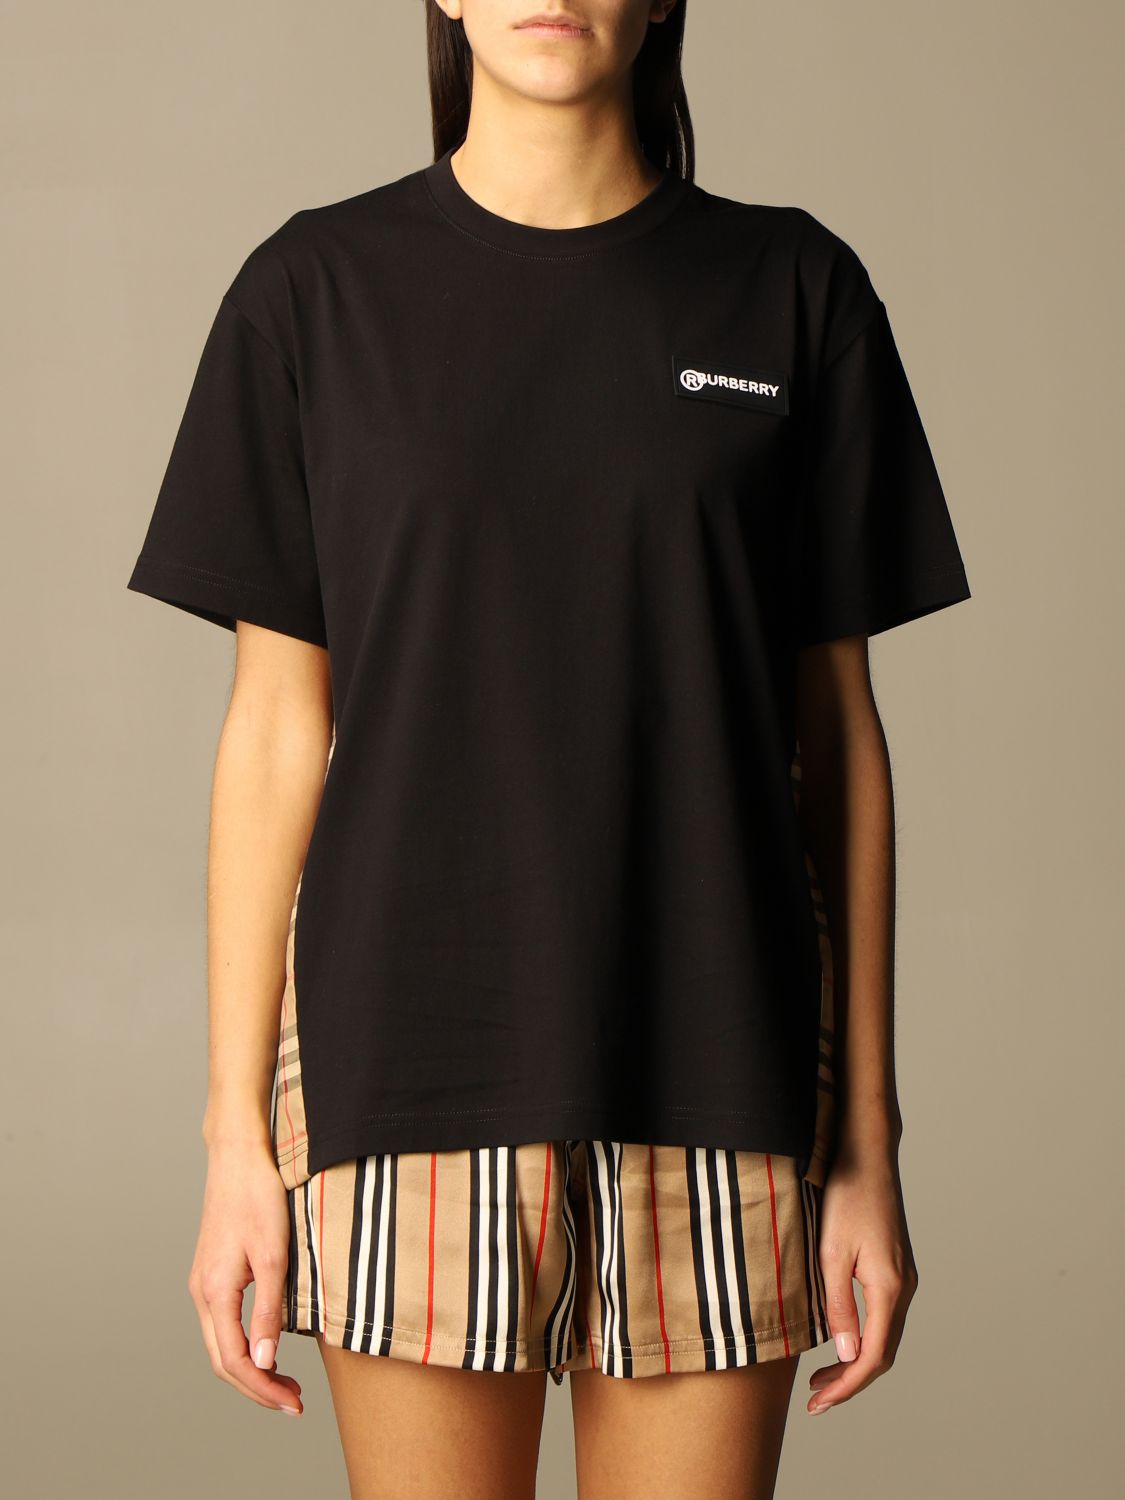 BURBERRY: Carrick T-shirt with check bands - Black | Burberry t-shirt ...